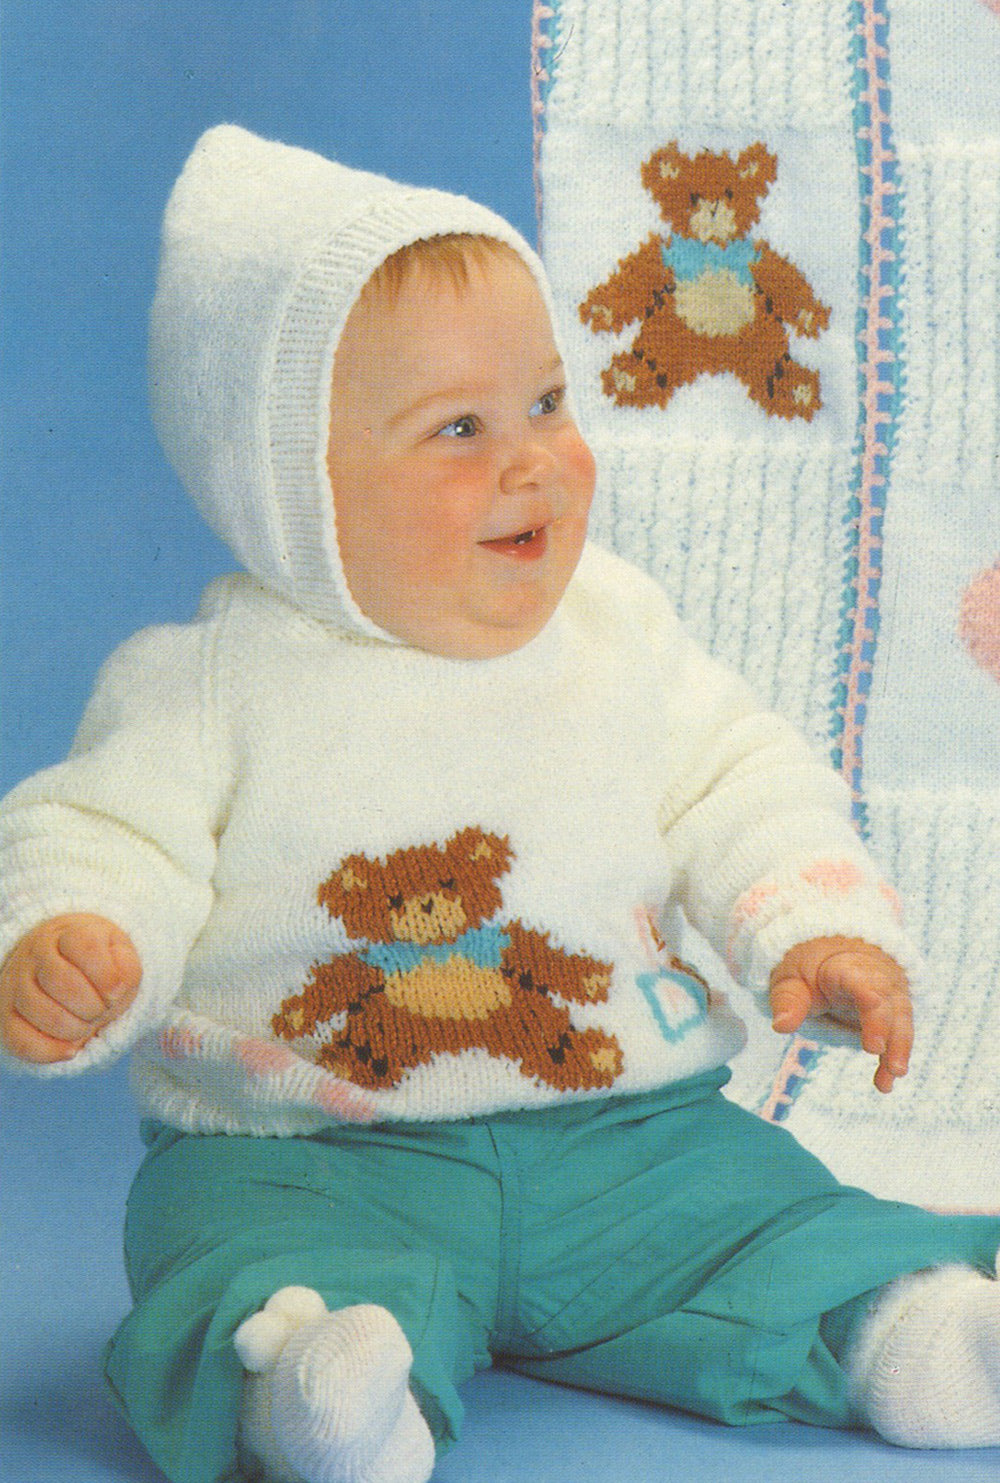 Hooded Baby Sweater With Bears Pattern